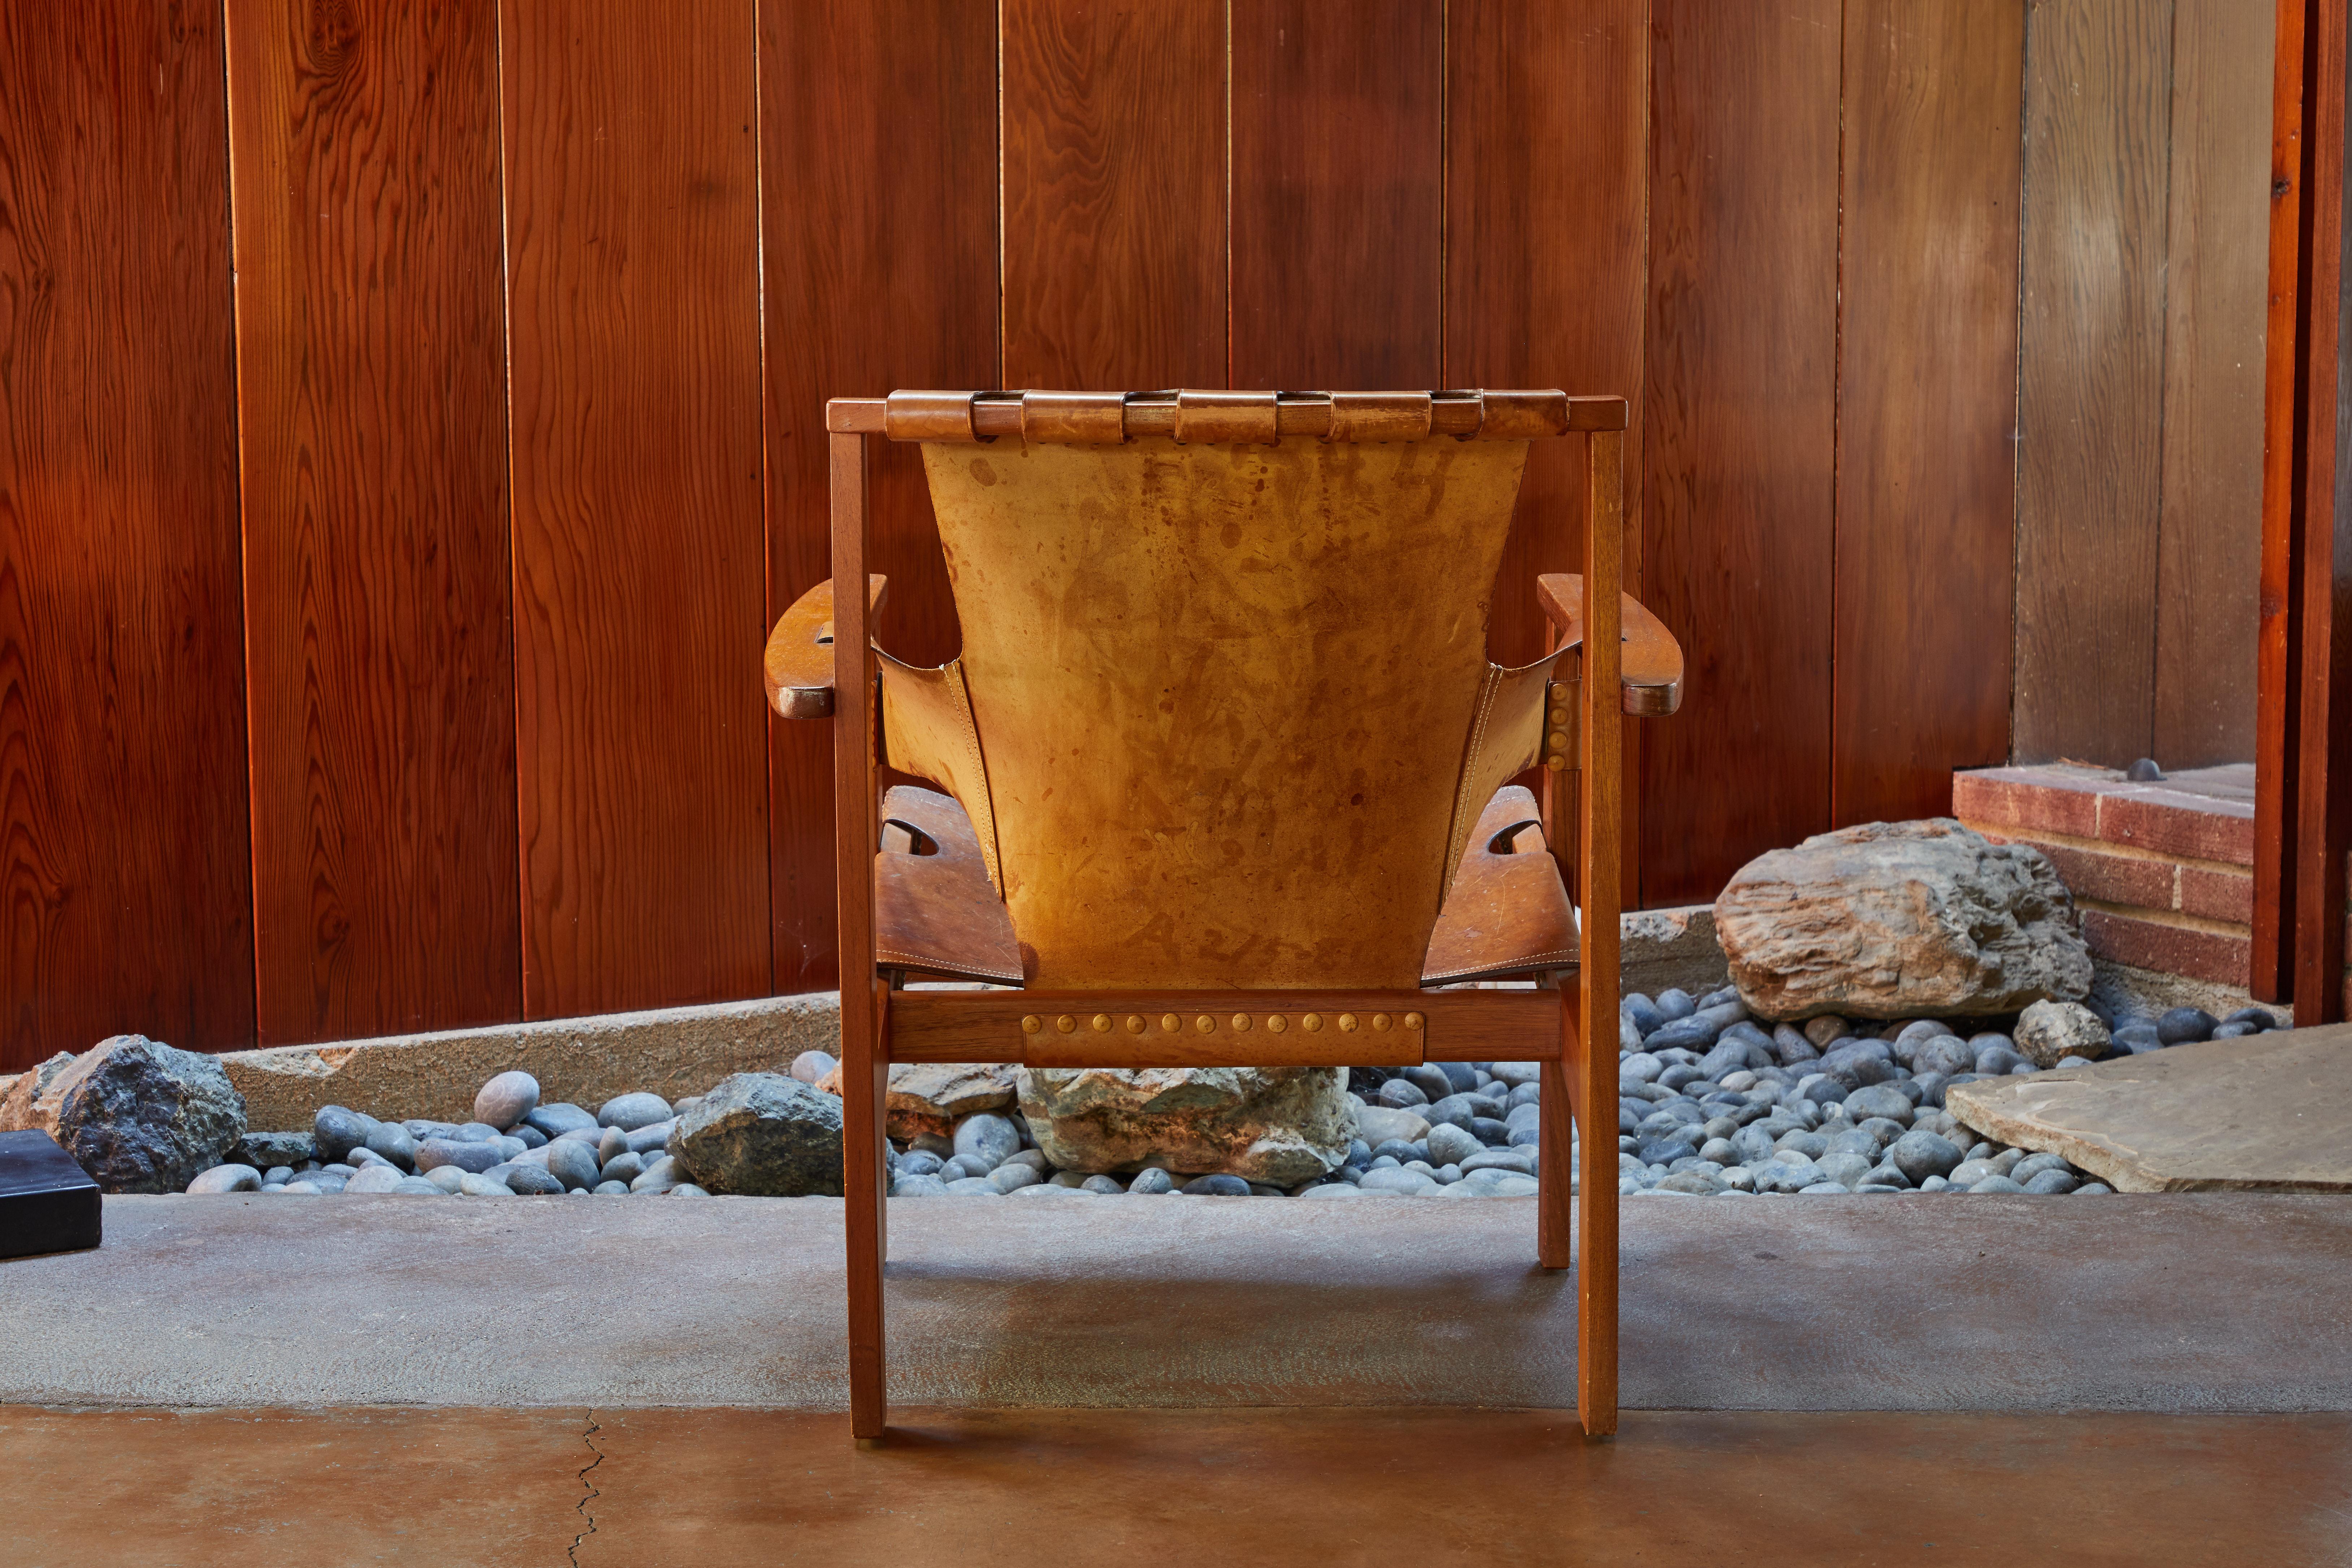 Mid-20th Century Carl Axel Acking 'Trienna' Chair in Patinated Brown Leather, circa 1957